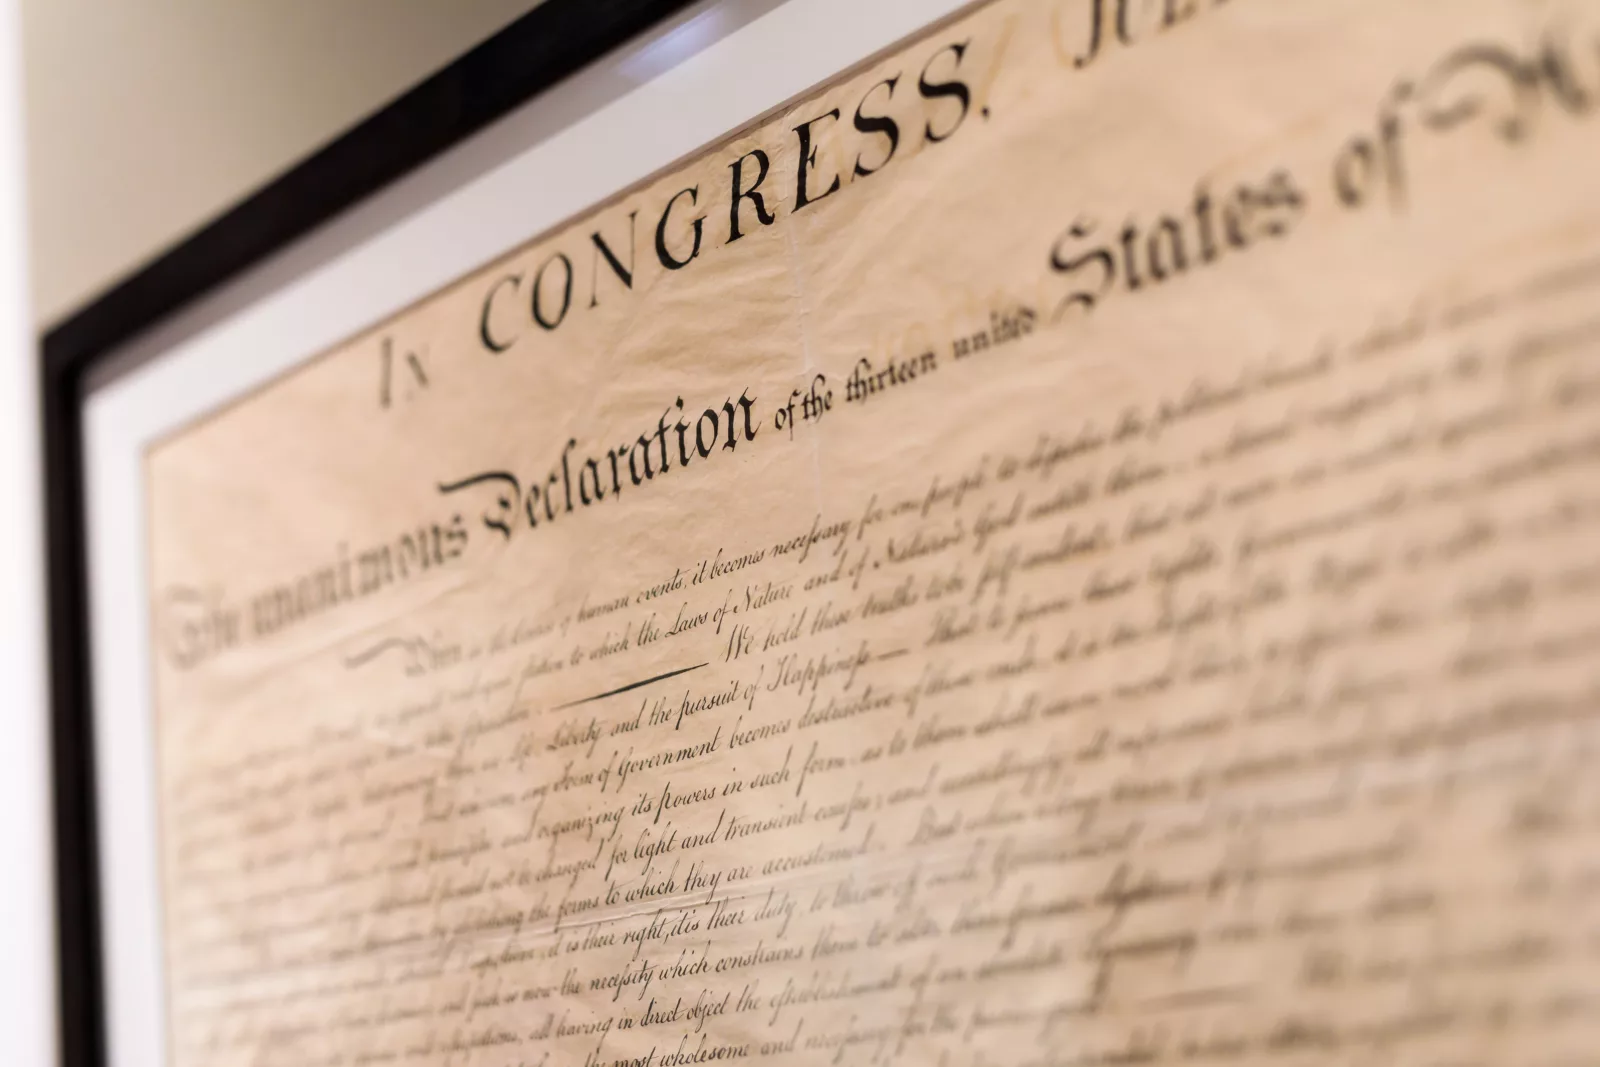 The text of the Declaration of Independence appears on display under glass. Though the text appears to be handwritten, it was actually engraved.